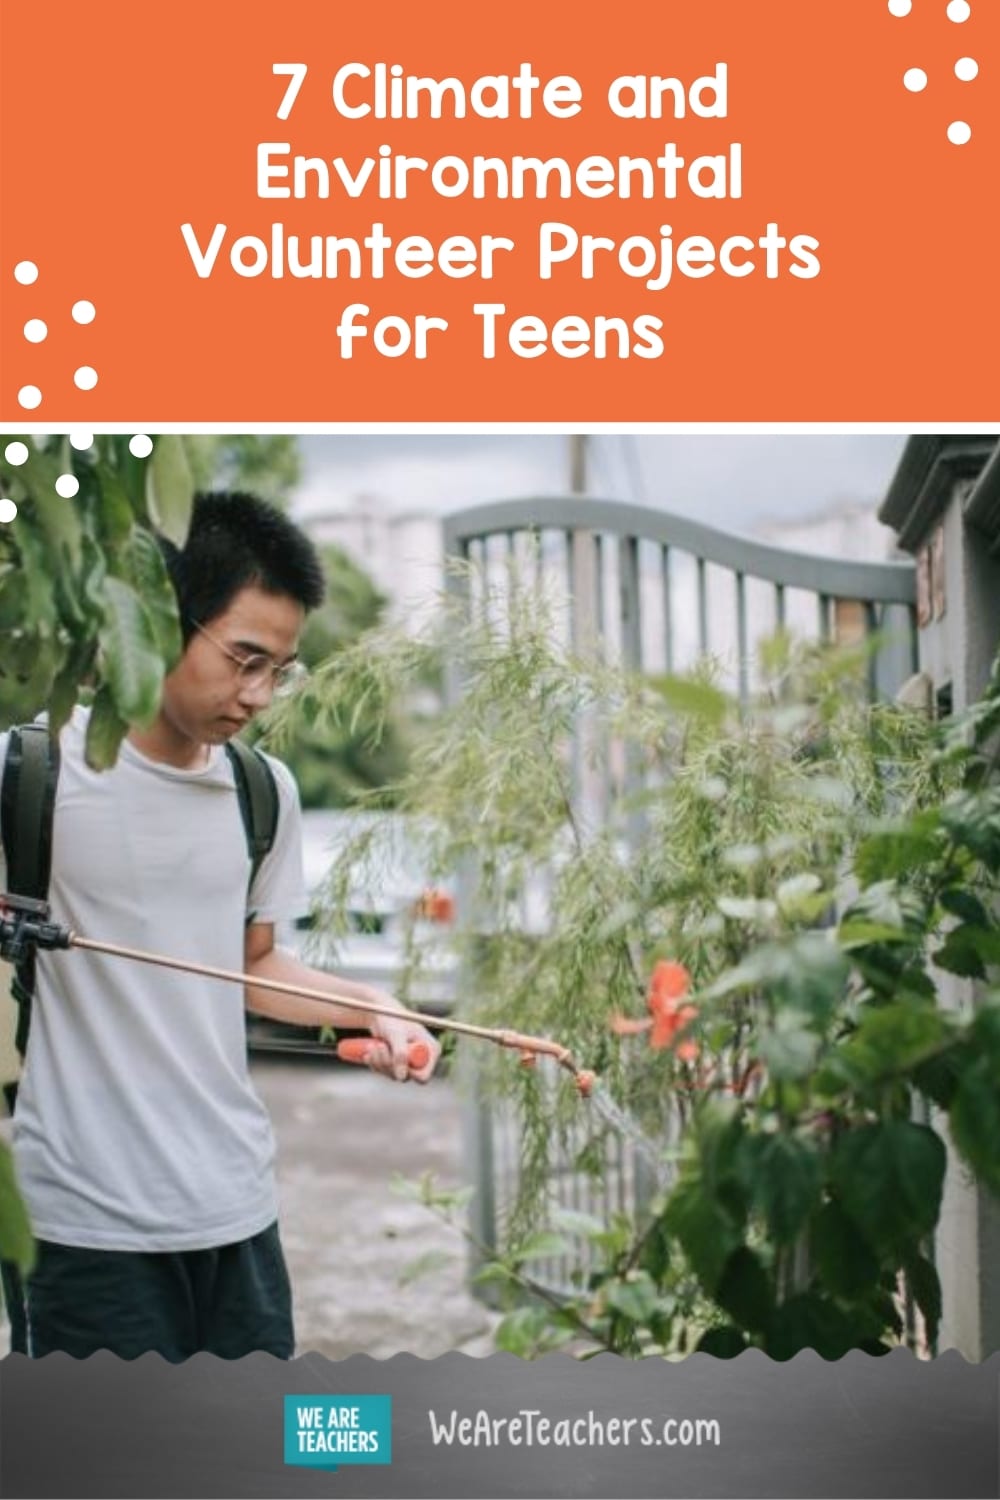 7 Climate and Environmental Volunteer Projects for Teens